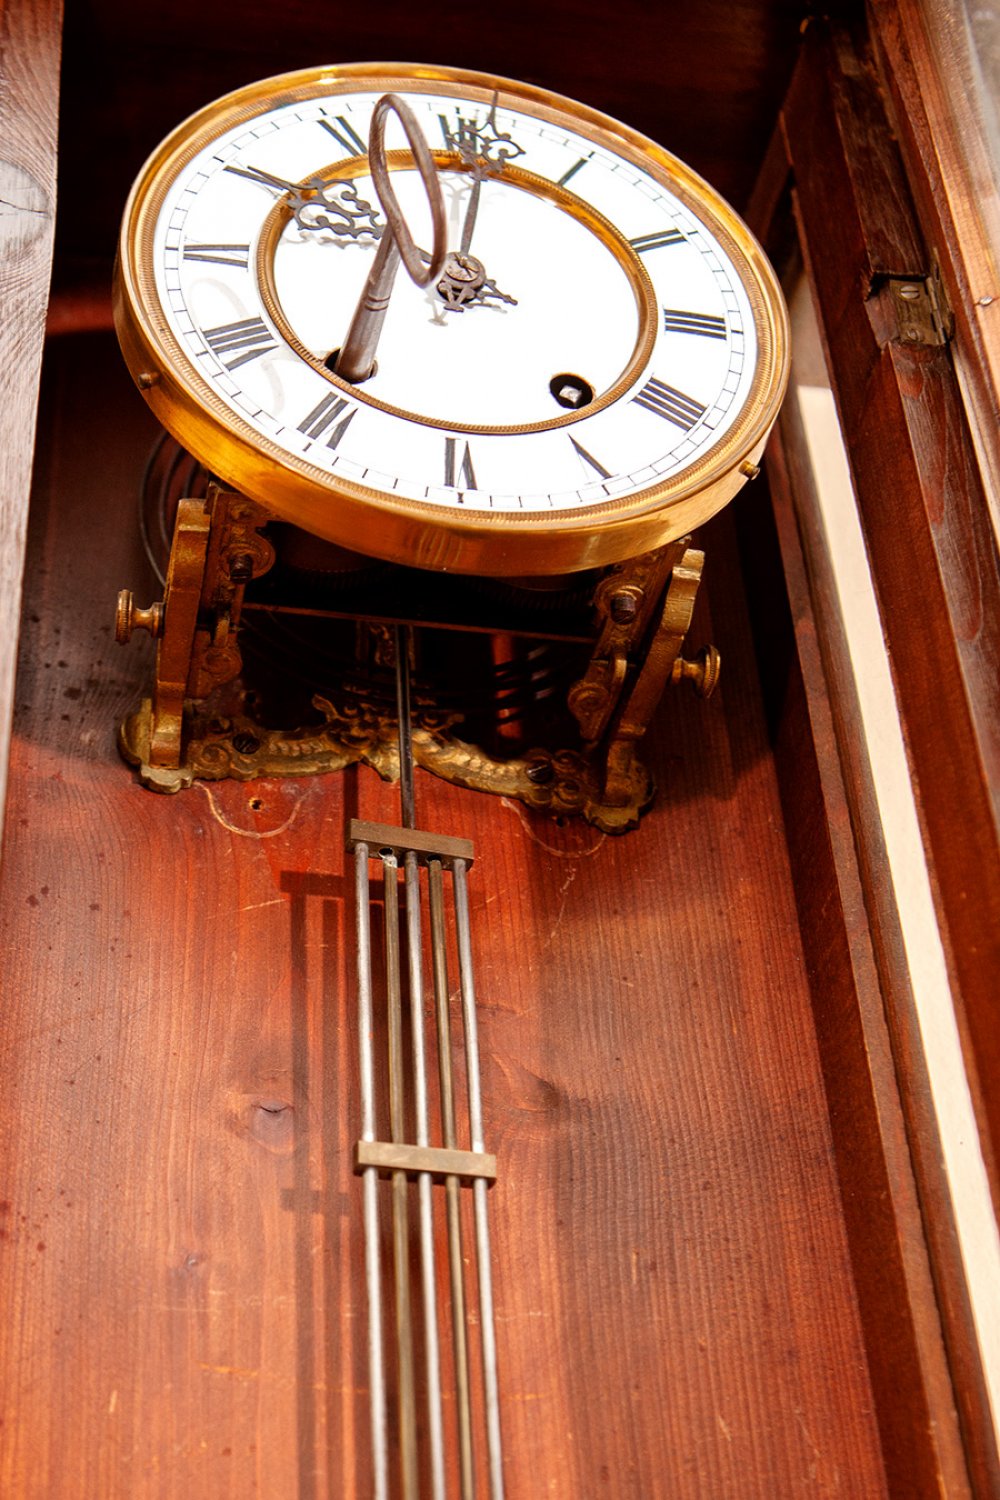 Early 20th century wall clock.Wood.Measurements: 86 x 32 x 17 cm.Wall clock made of wood. The - Image 5 of 5